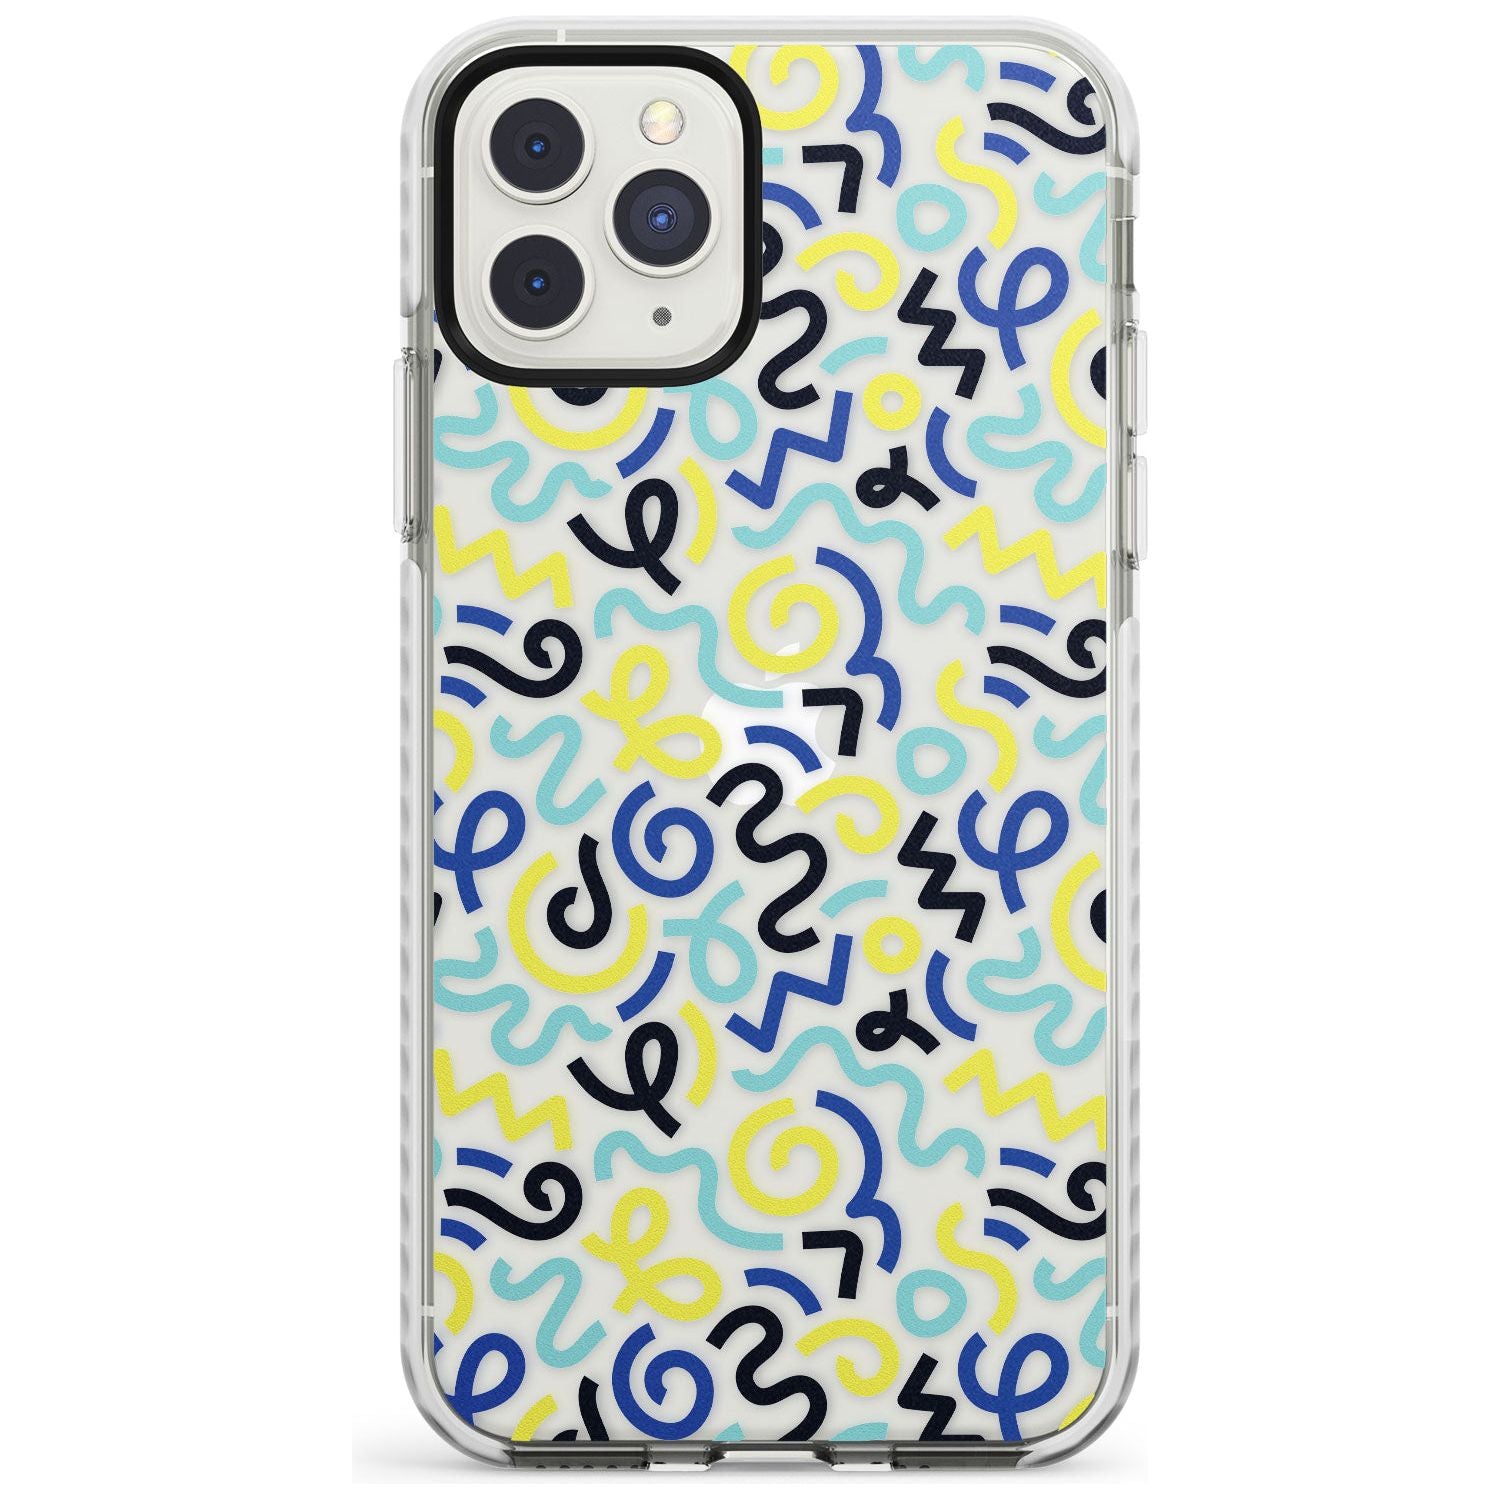 Blue & Yellow Shapes Memphis Retro Pattern Design Impact Phone Case for iPhone 11 Pro Max